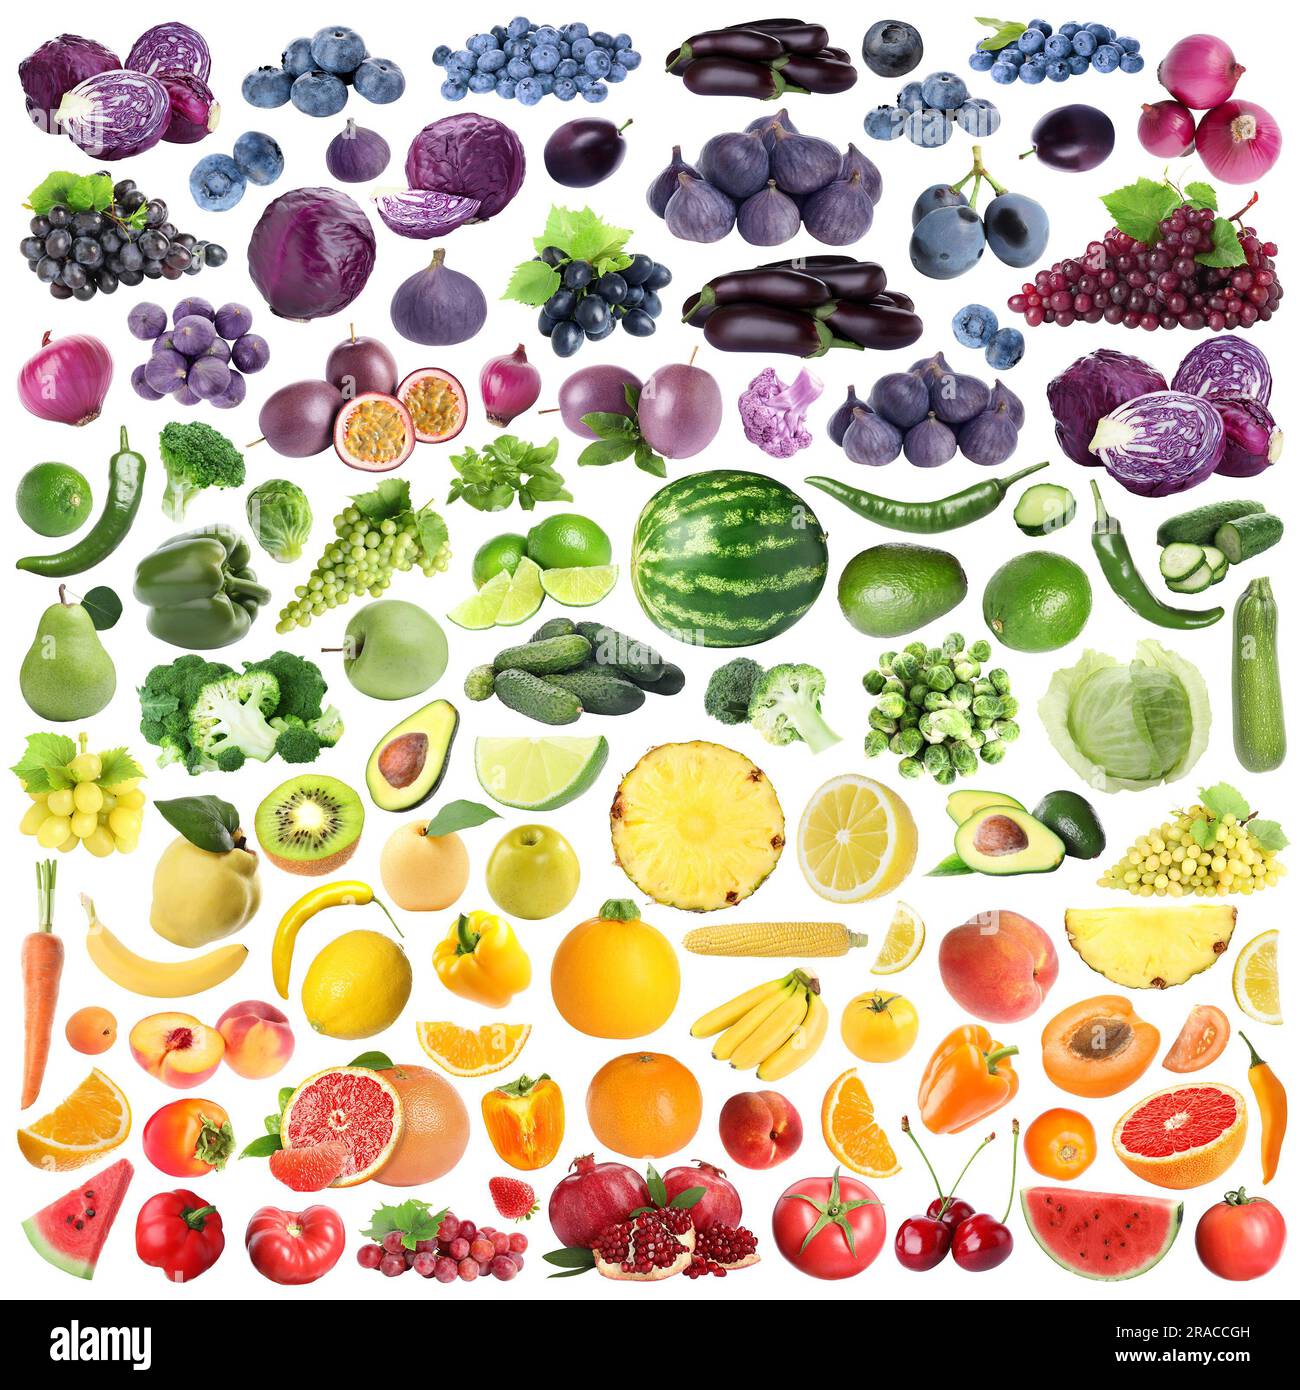 https://c8.alamy.com/comp/2RACCGH/many-fresh-fruits-and-vegetables-arranged-in-rainbow-colors-on-white-background-collage-2RACCGH.jpg